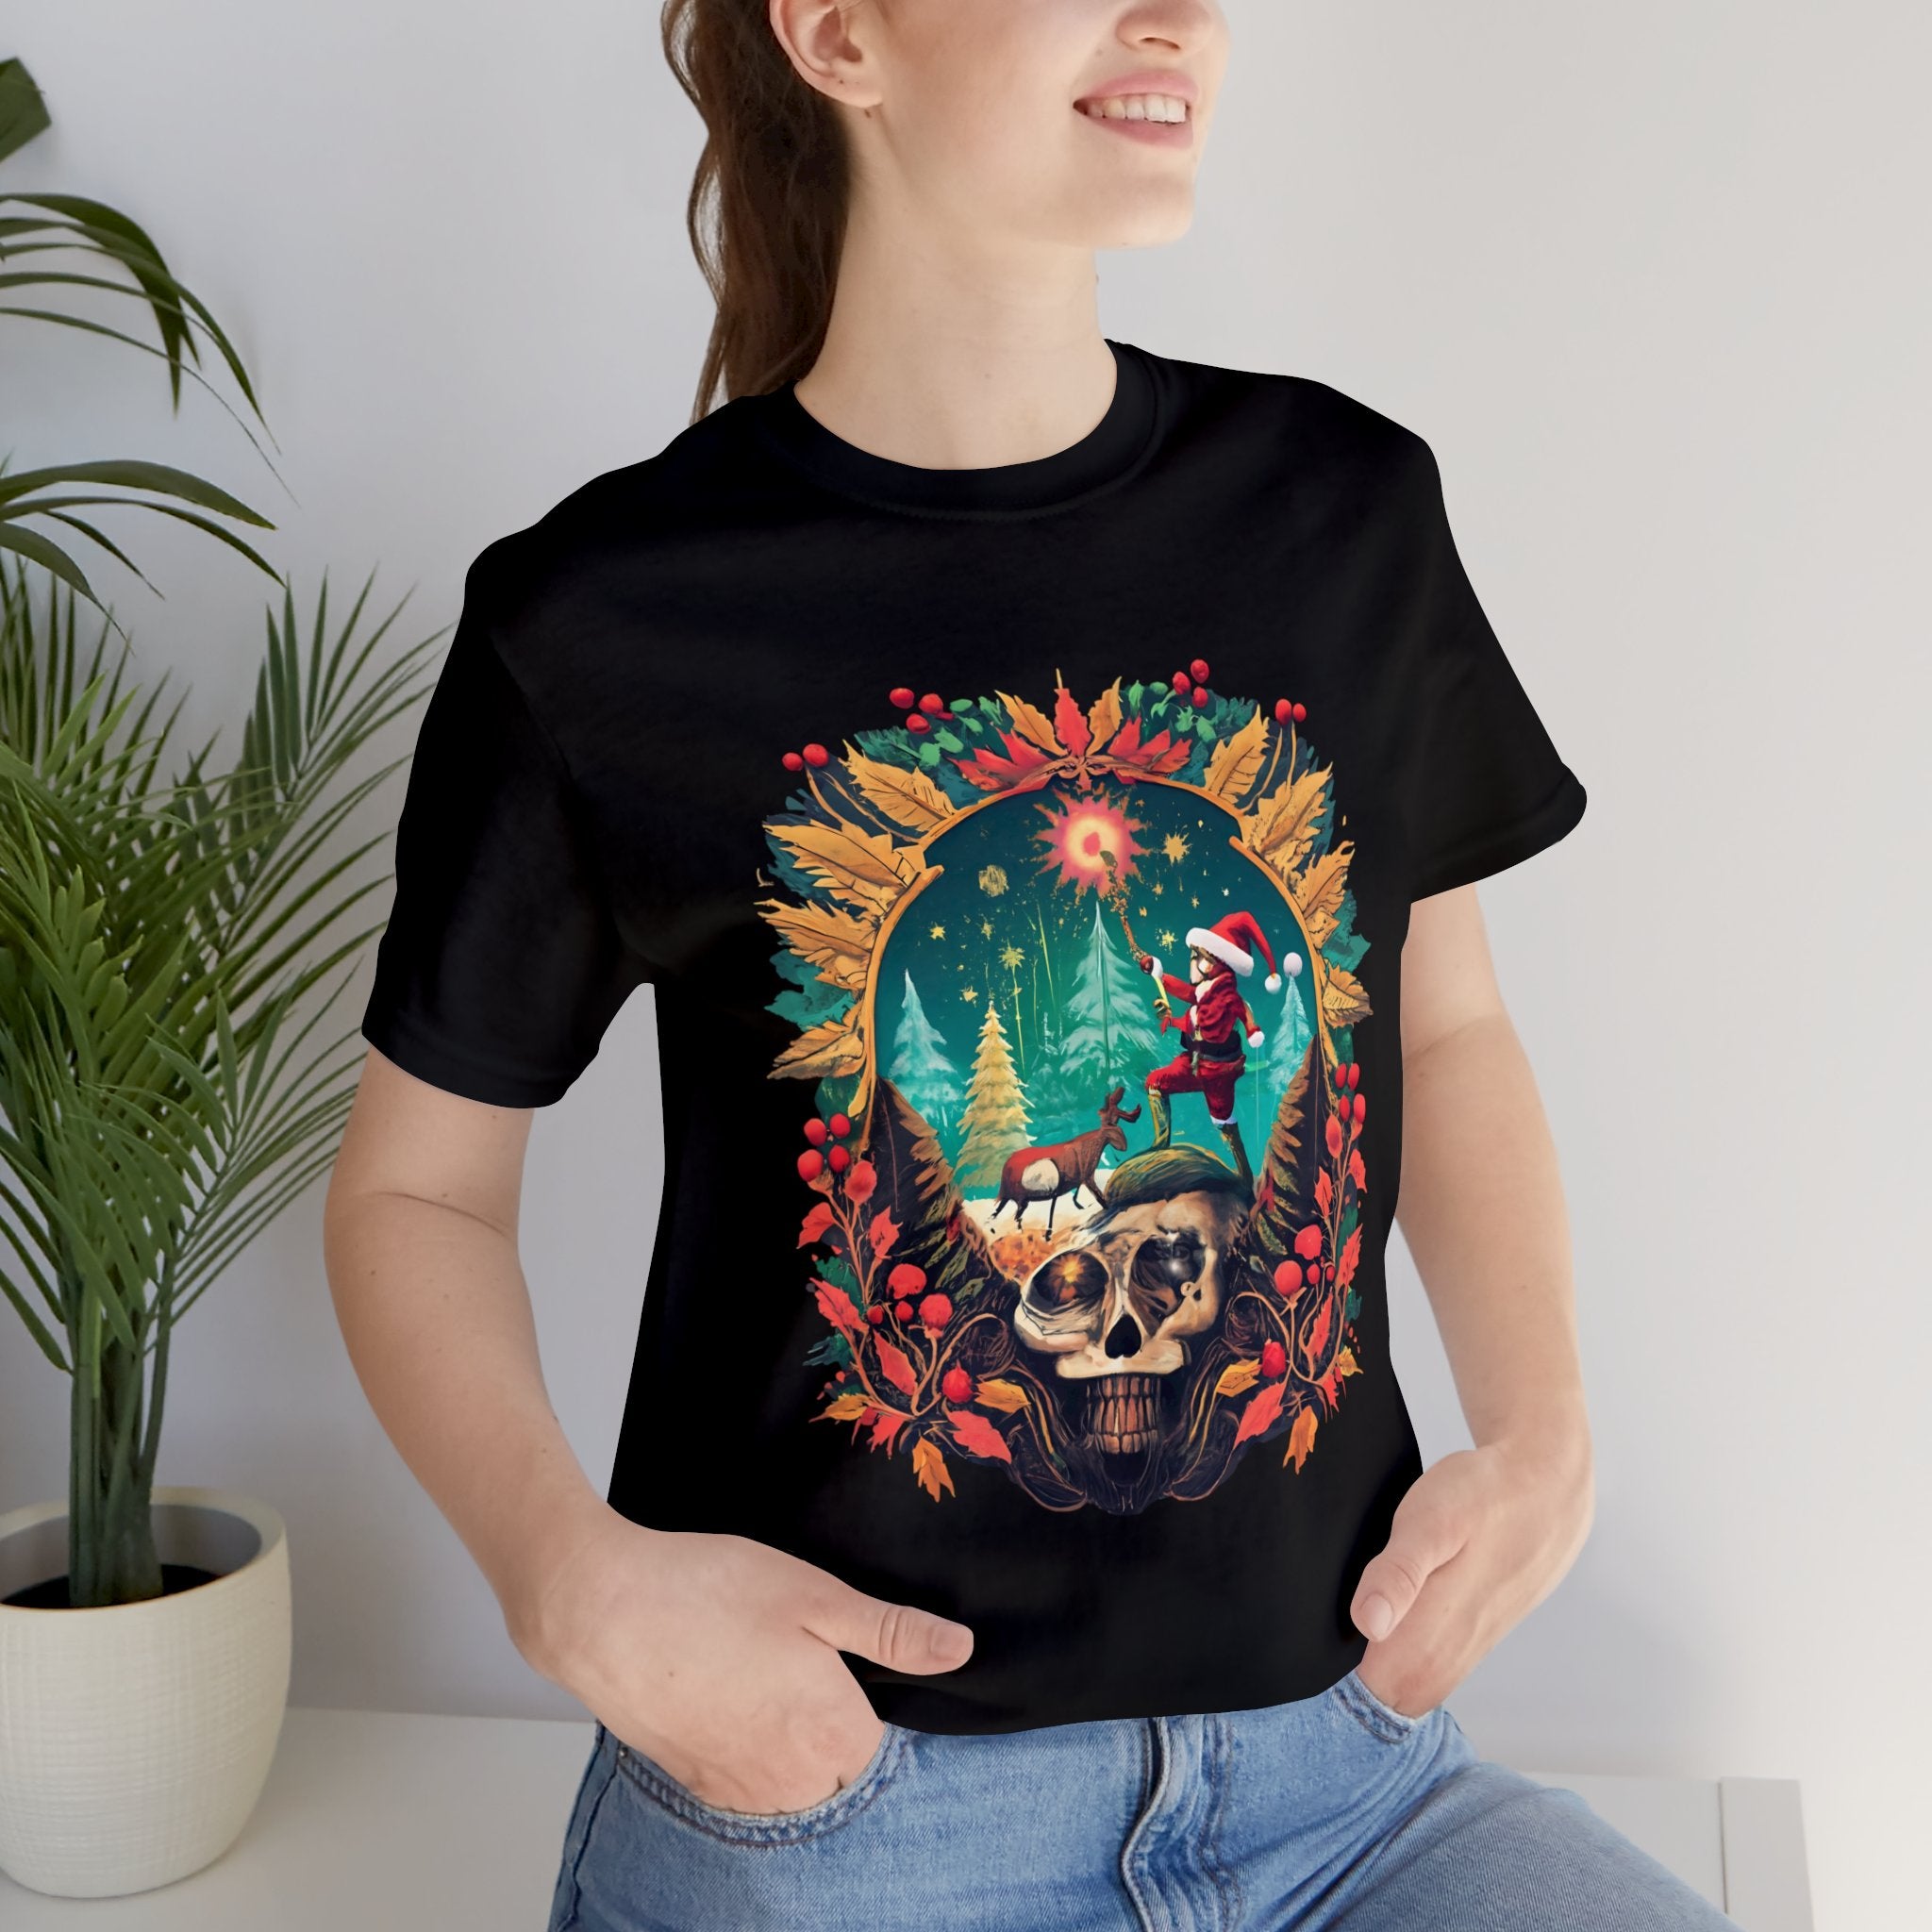 Exclusive Christmas Design With Skull Shirt